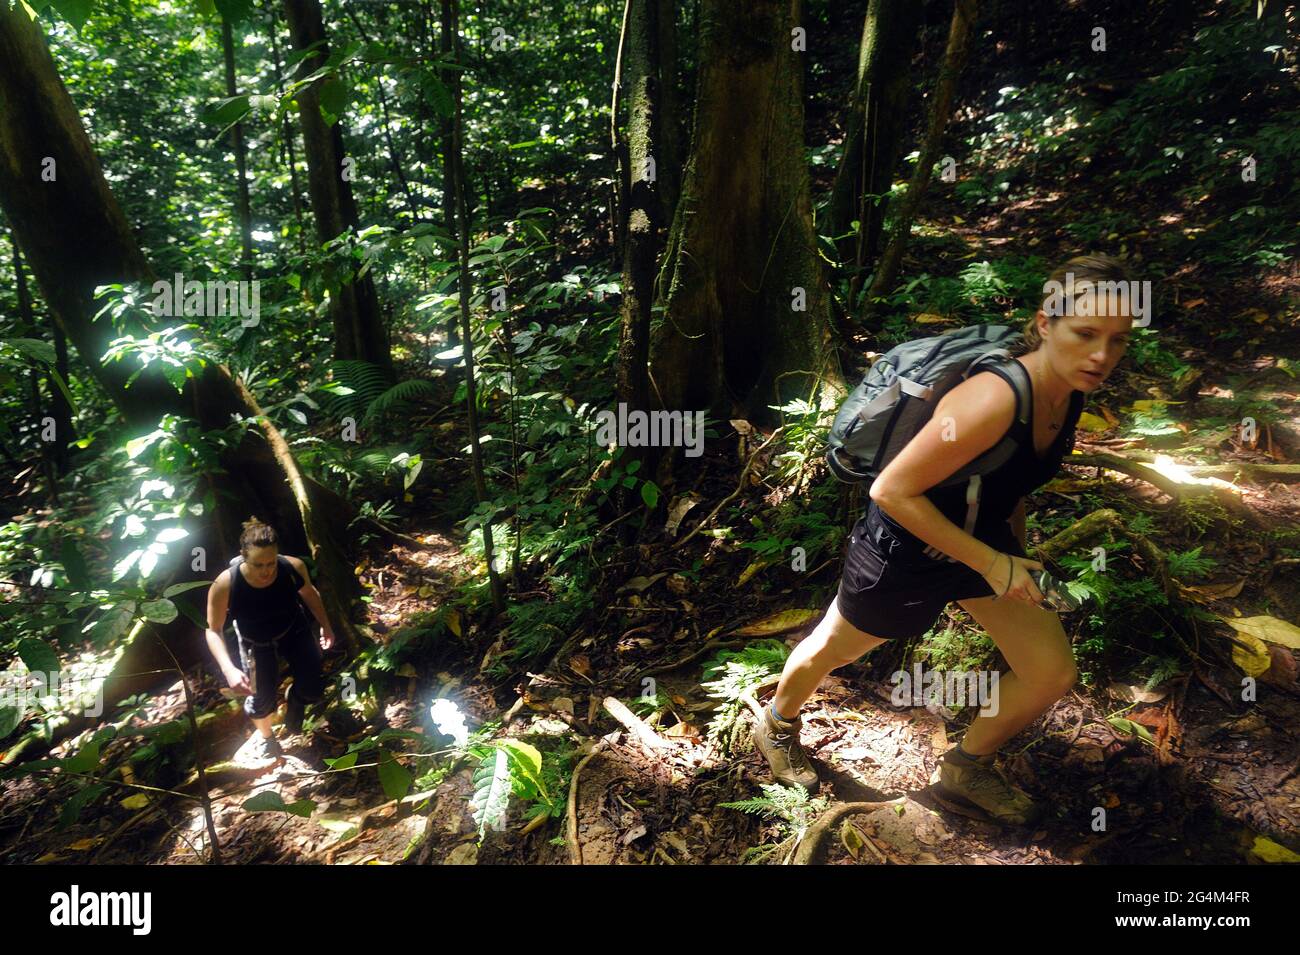 FRANCE. MARTINIQUE. HIKERS IN TROPICAL RAIN FOREST Stock Photo